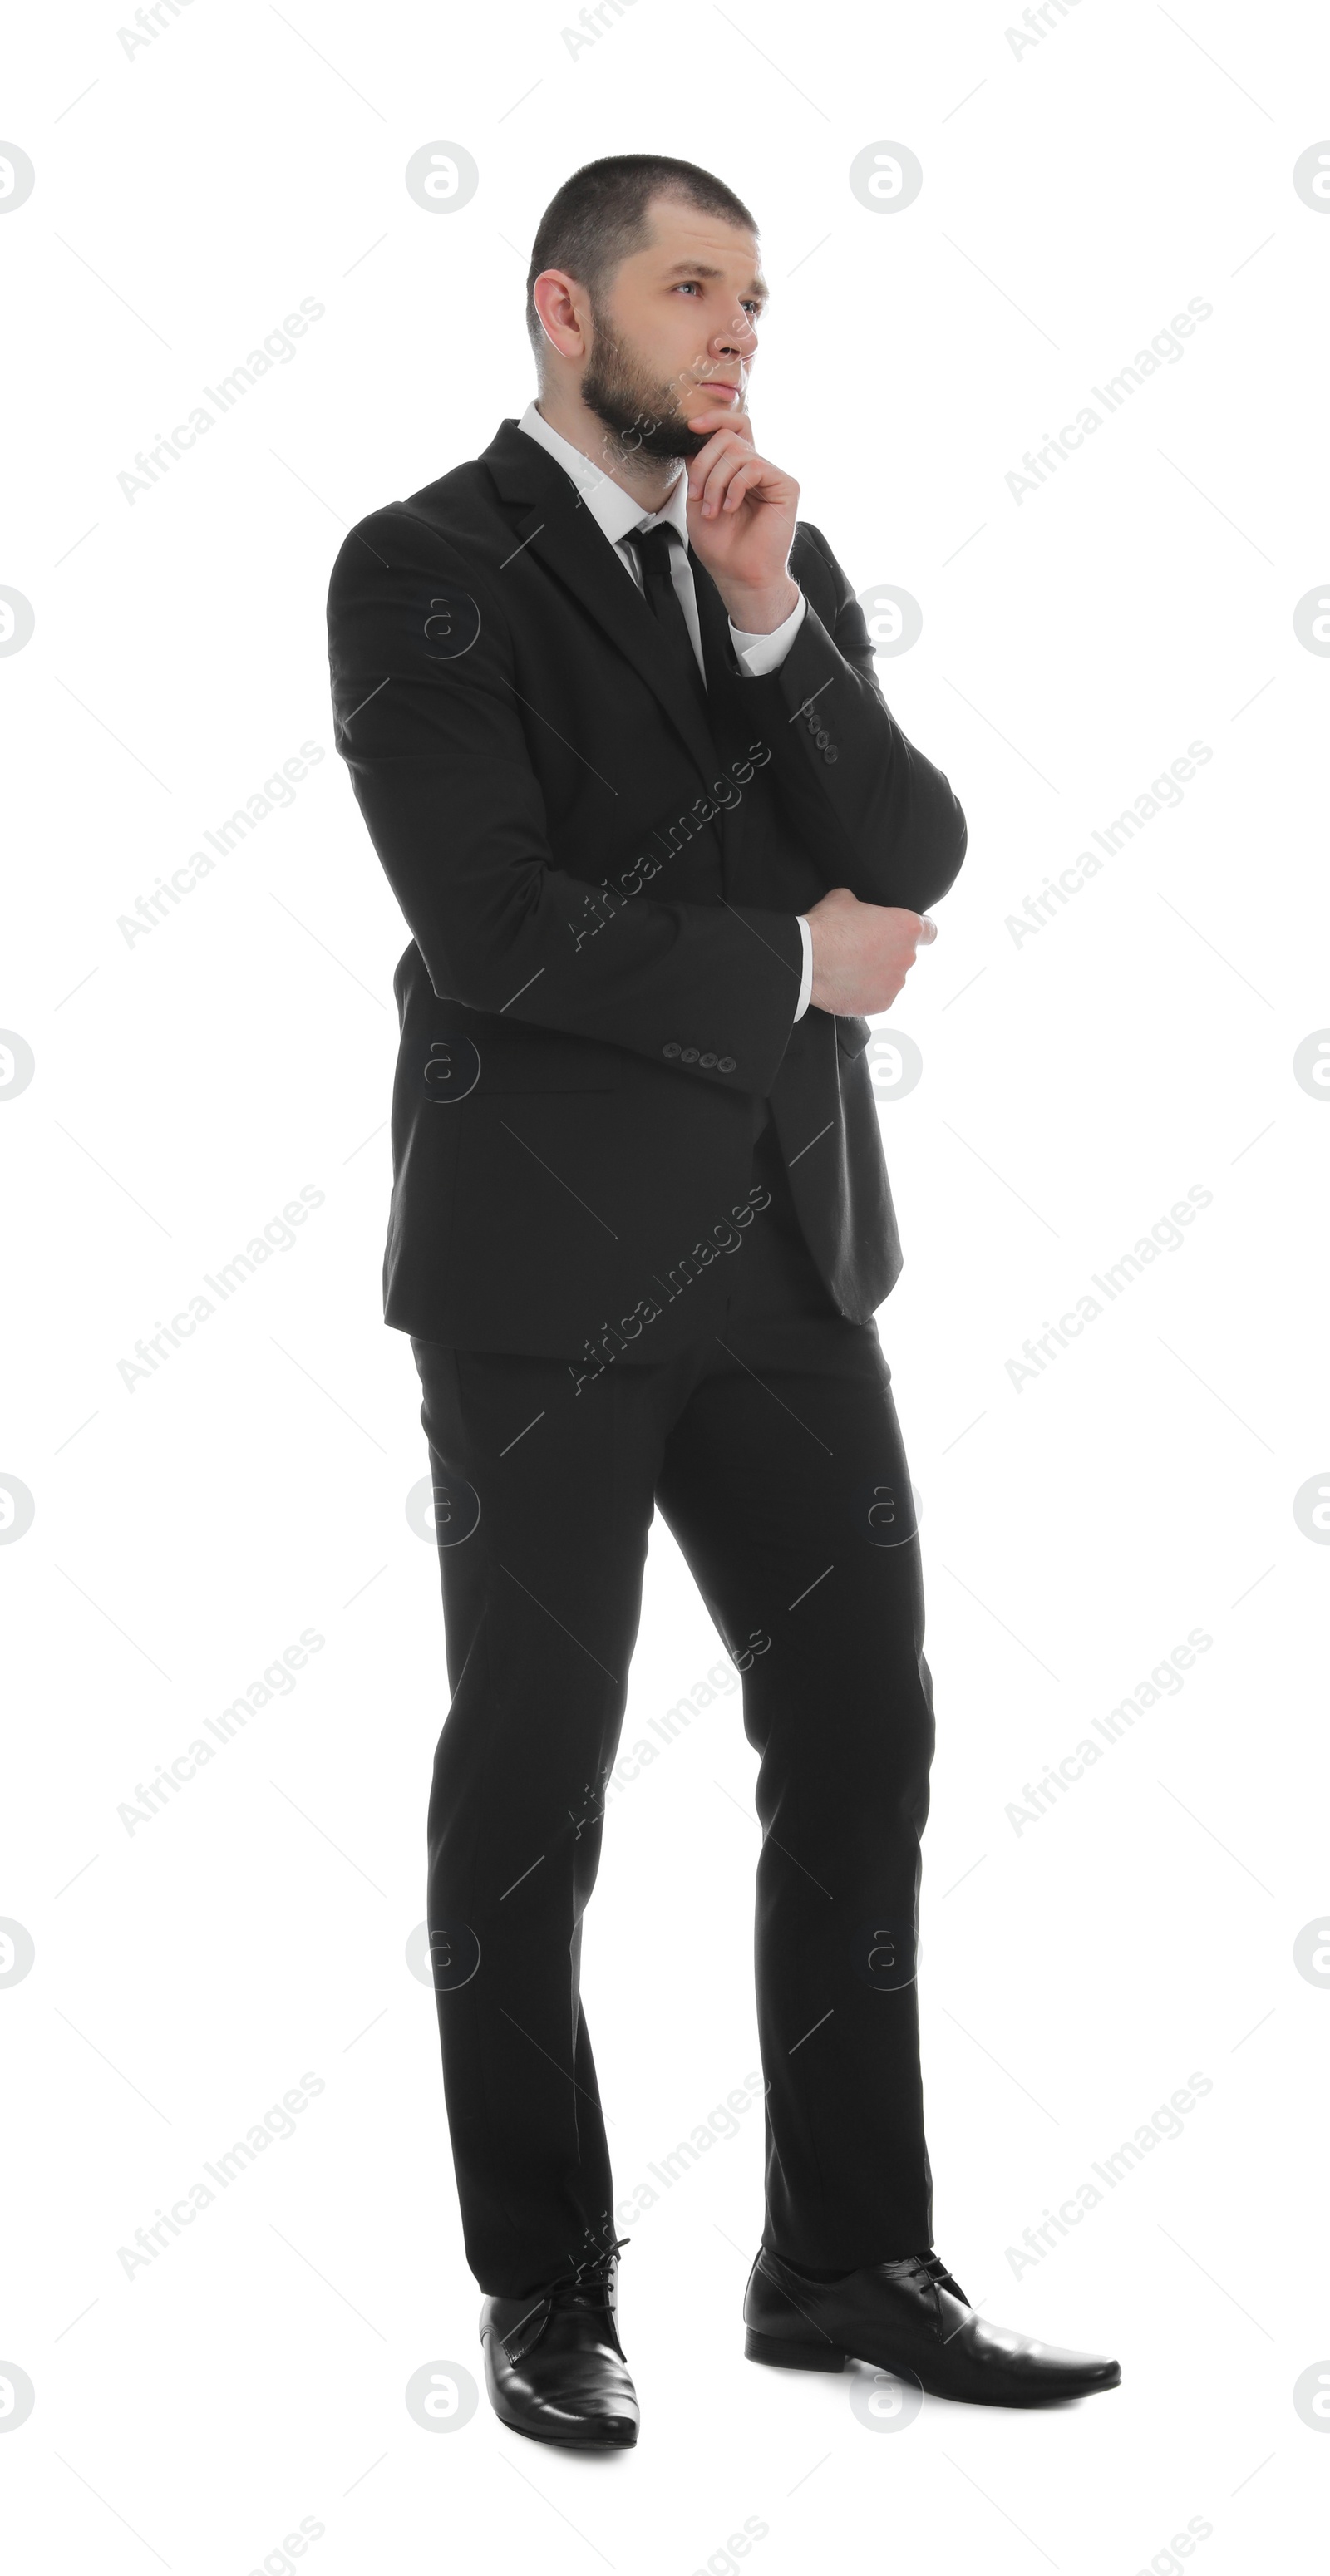 Photo of Thoughtful businessman in suit on white background